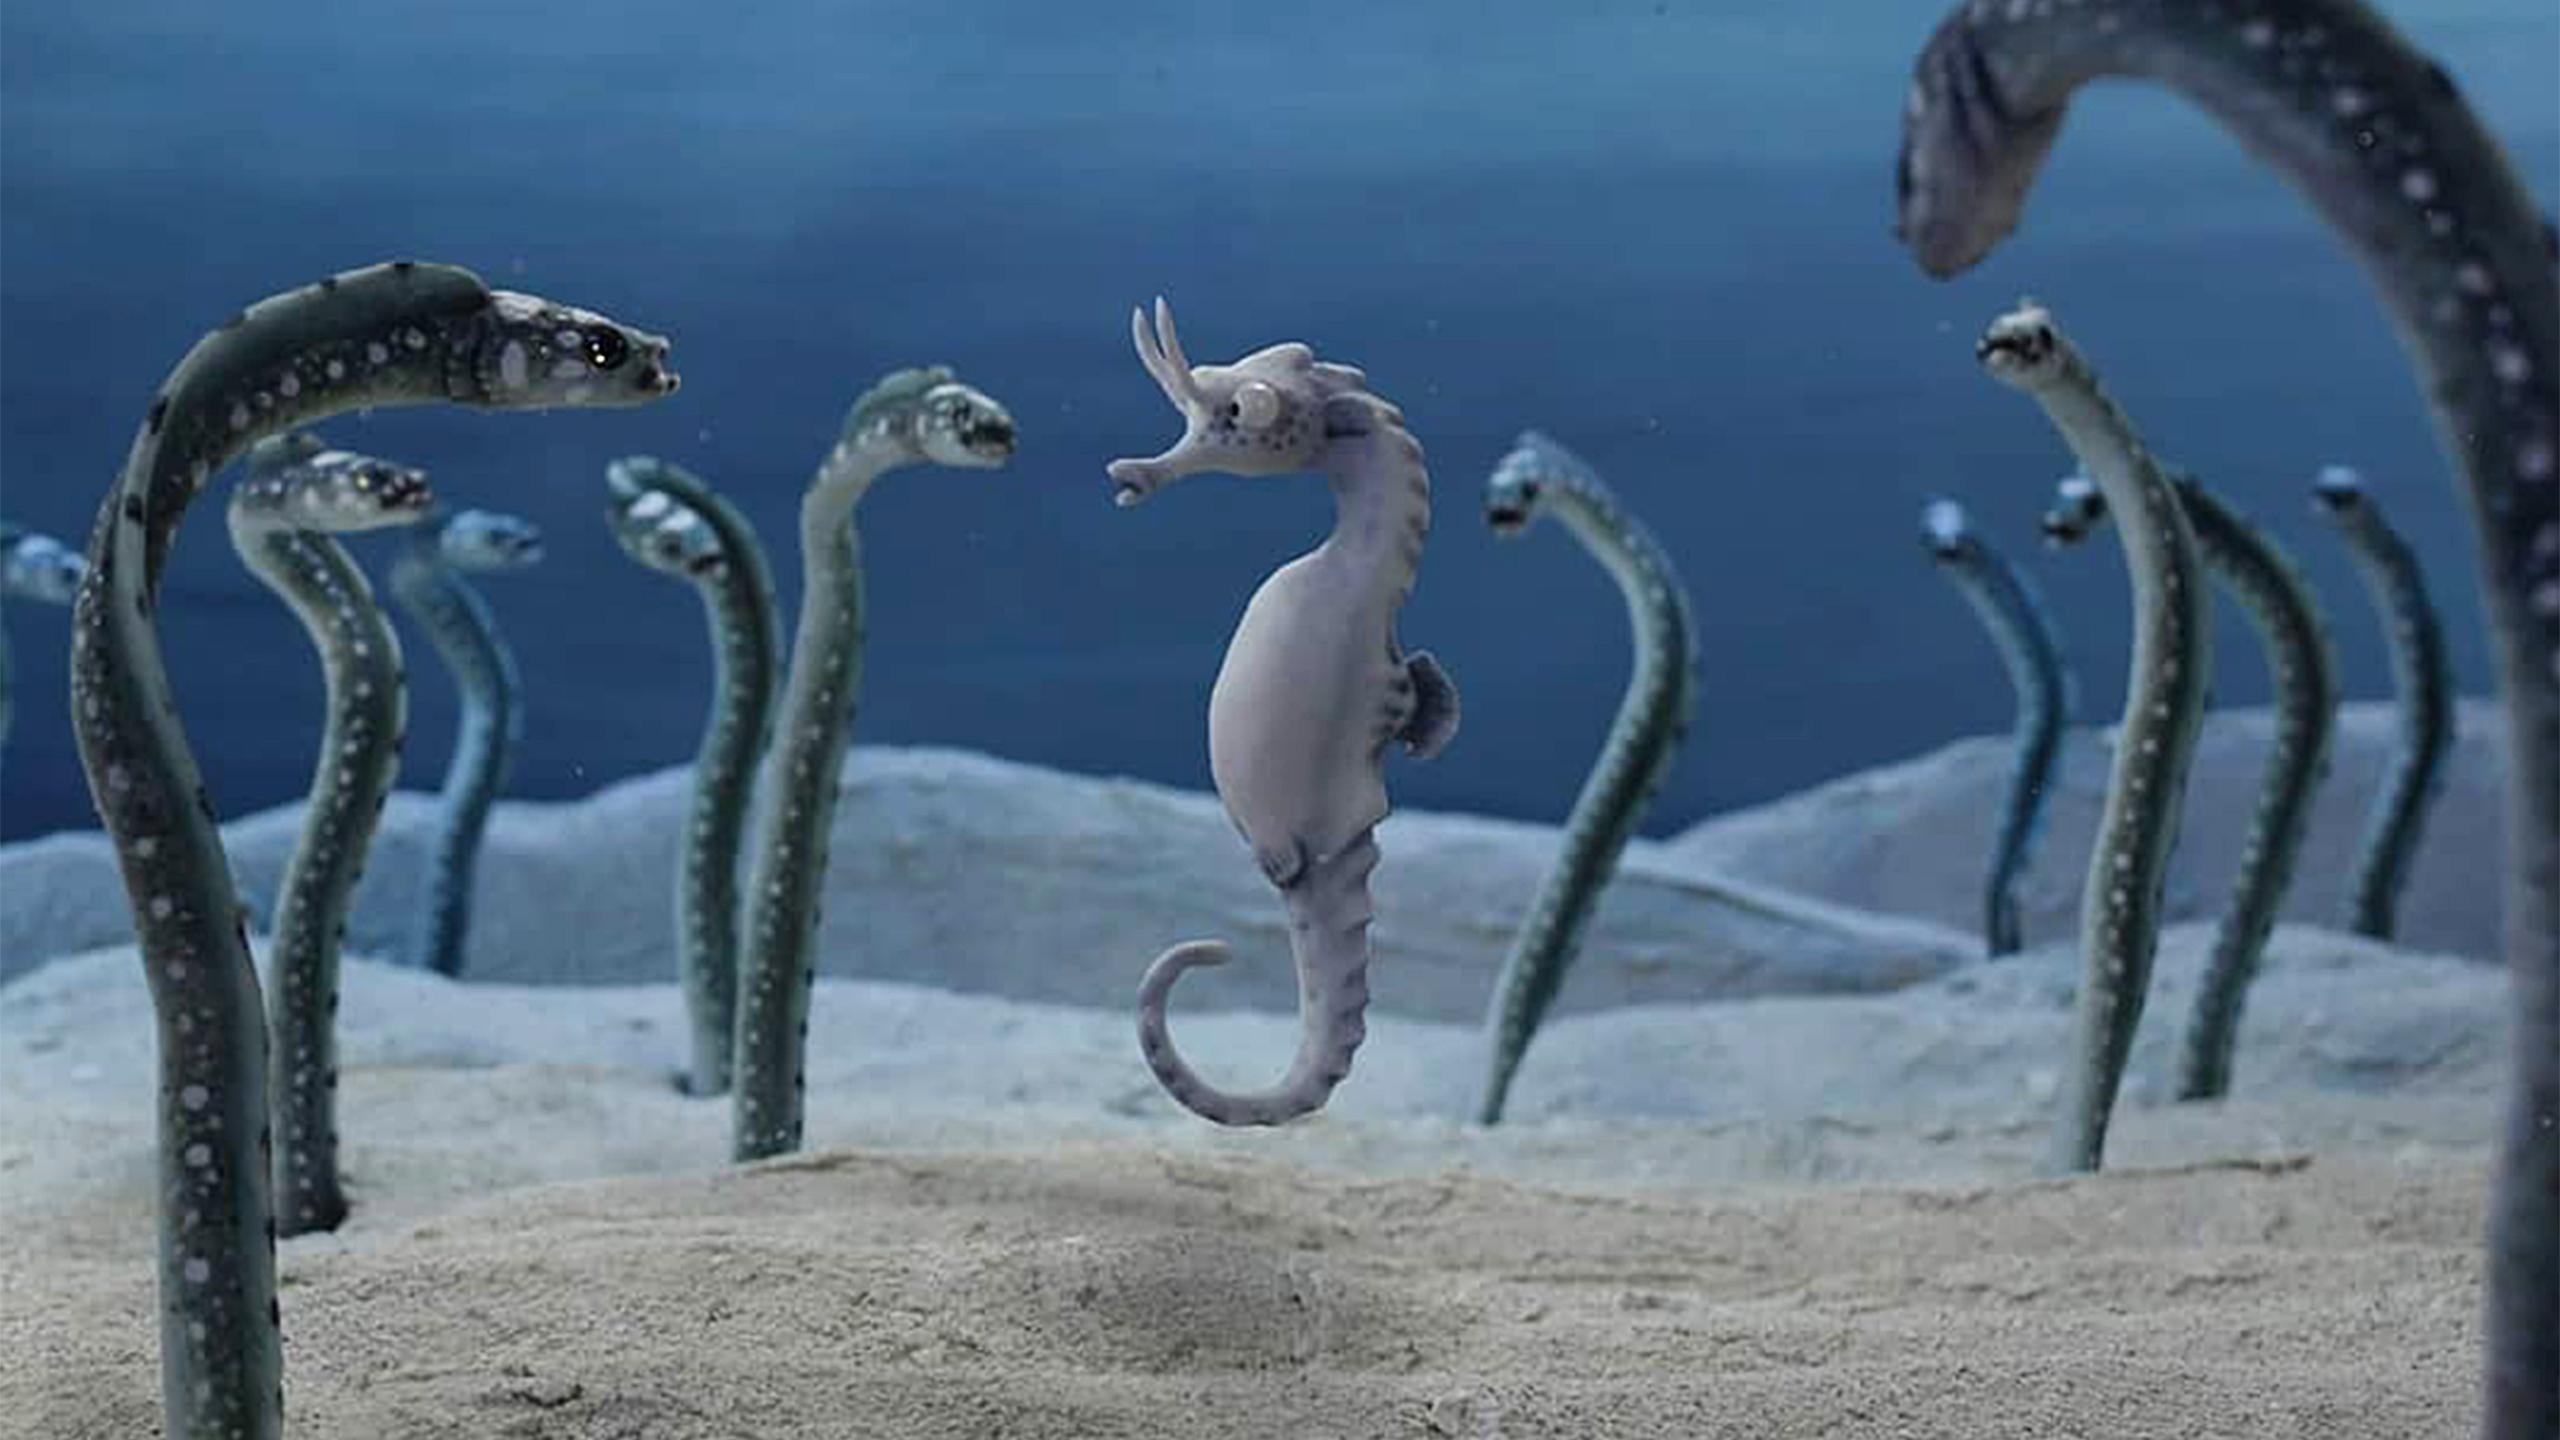 An animated seahorse surrounded by scary eels